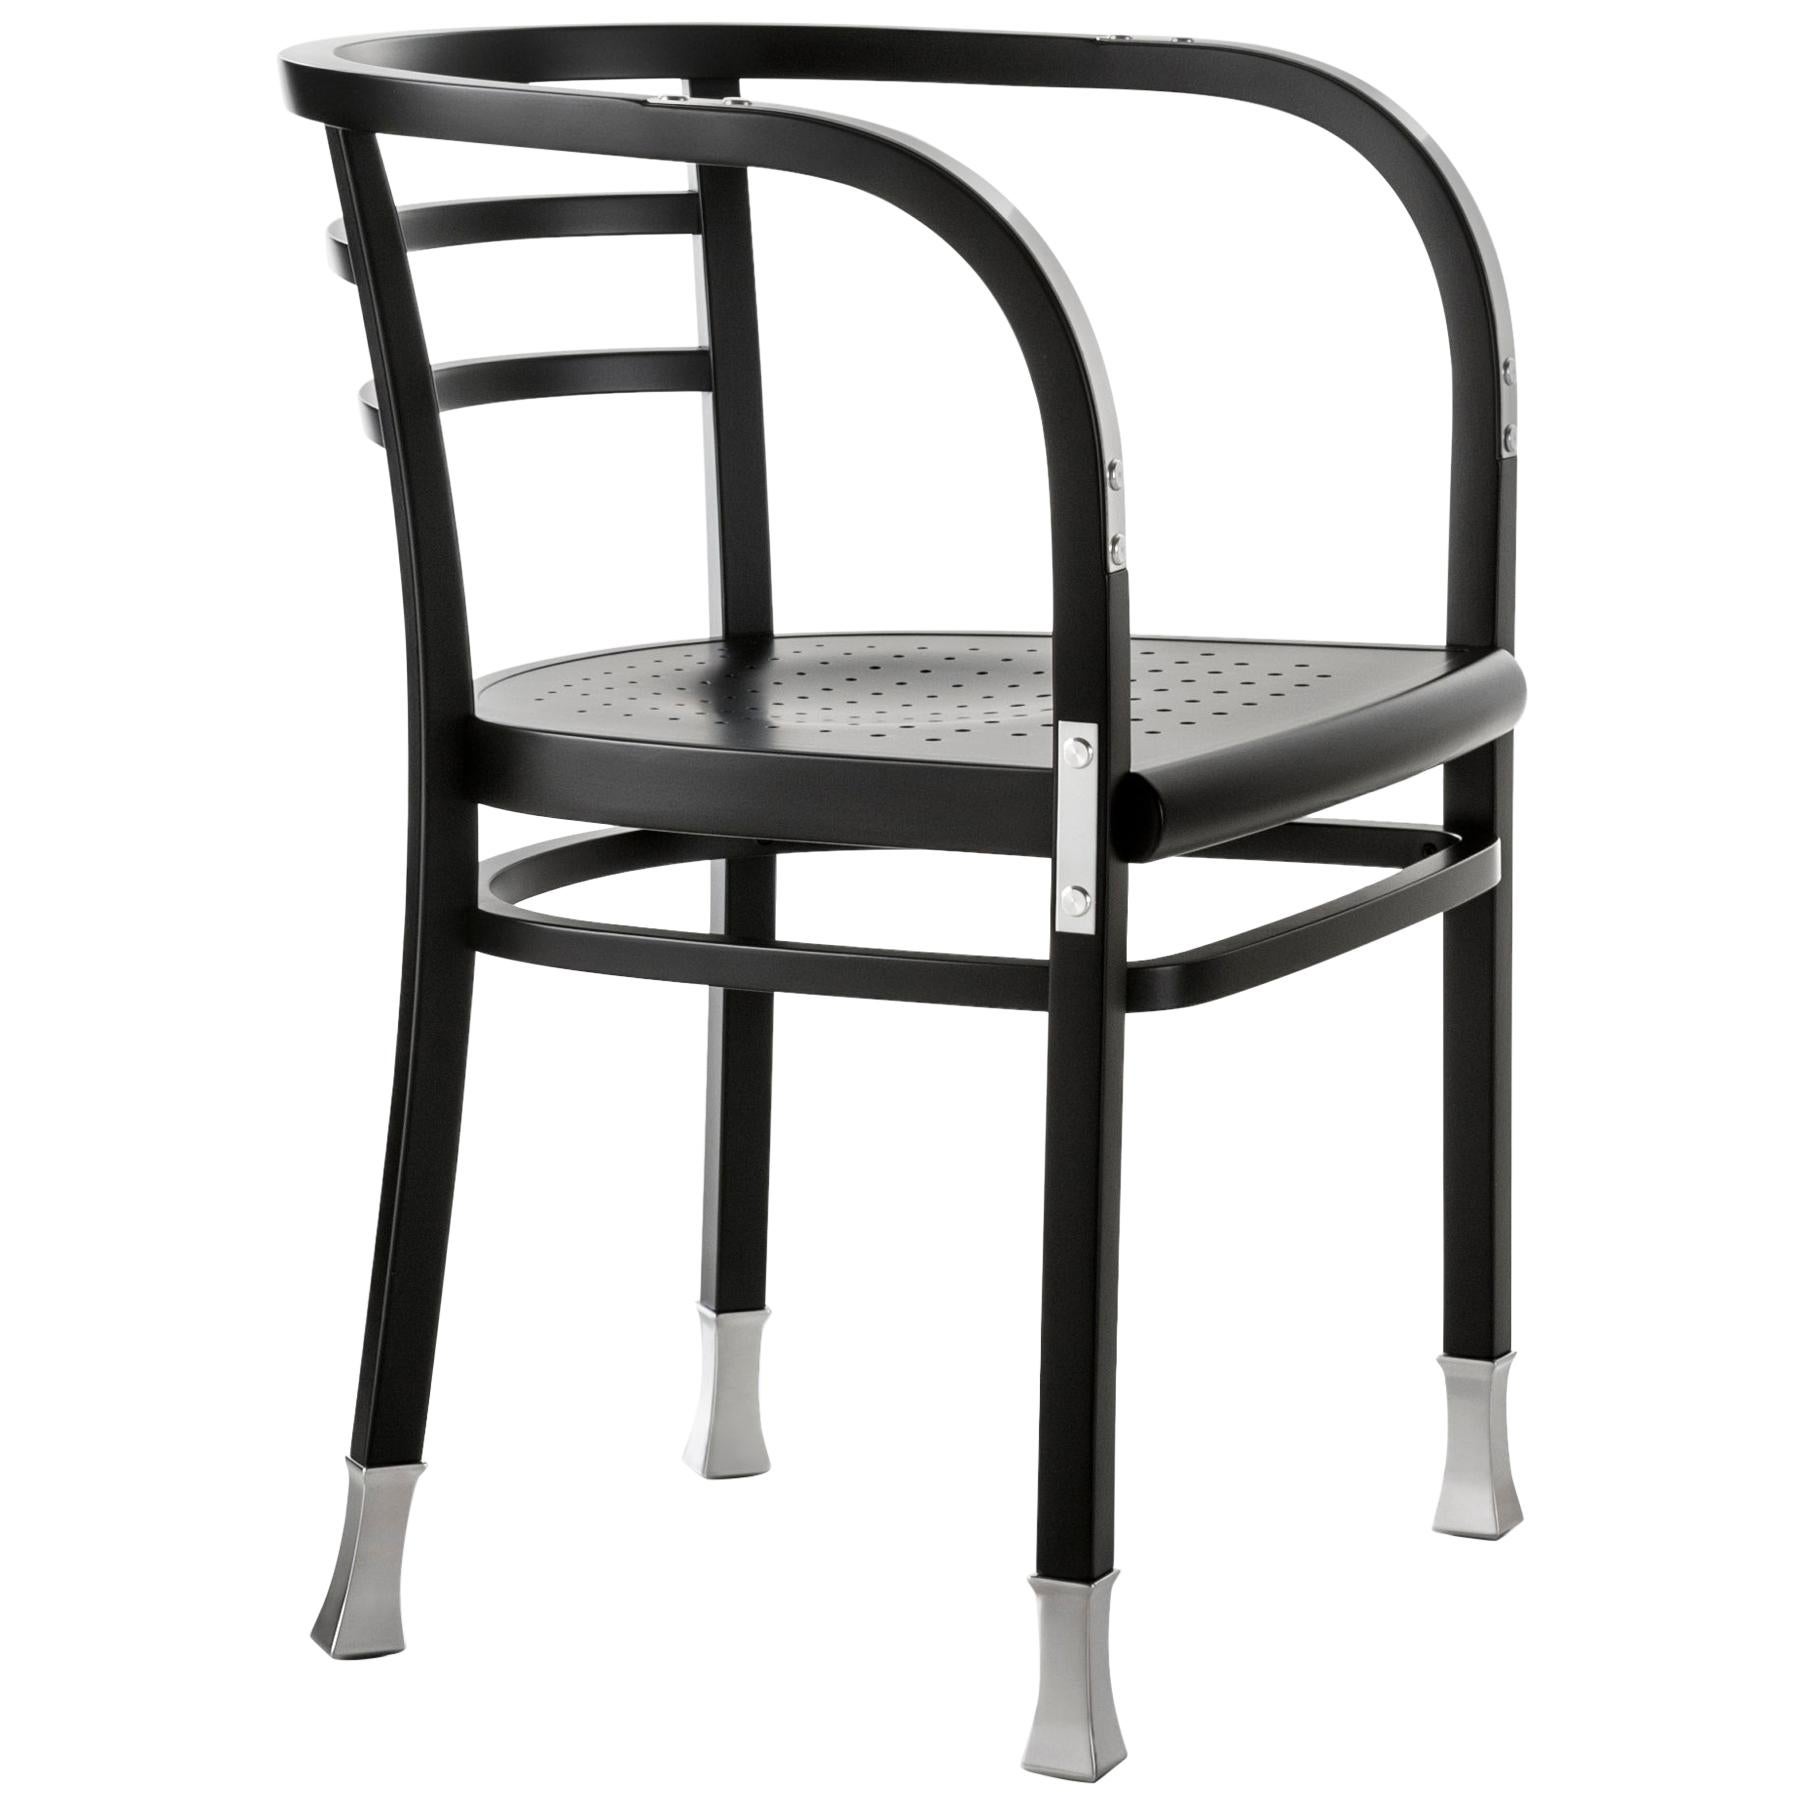 GTV Thonet Postsparkasse Chair in Black and Aluminium by Otto Wagner For Sale